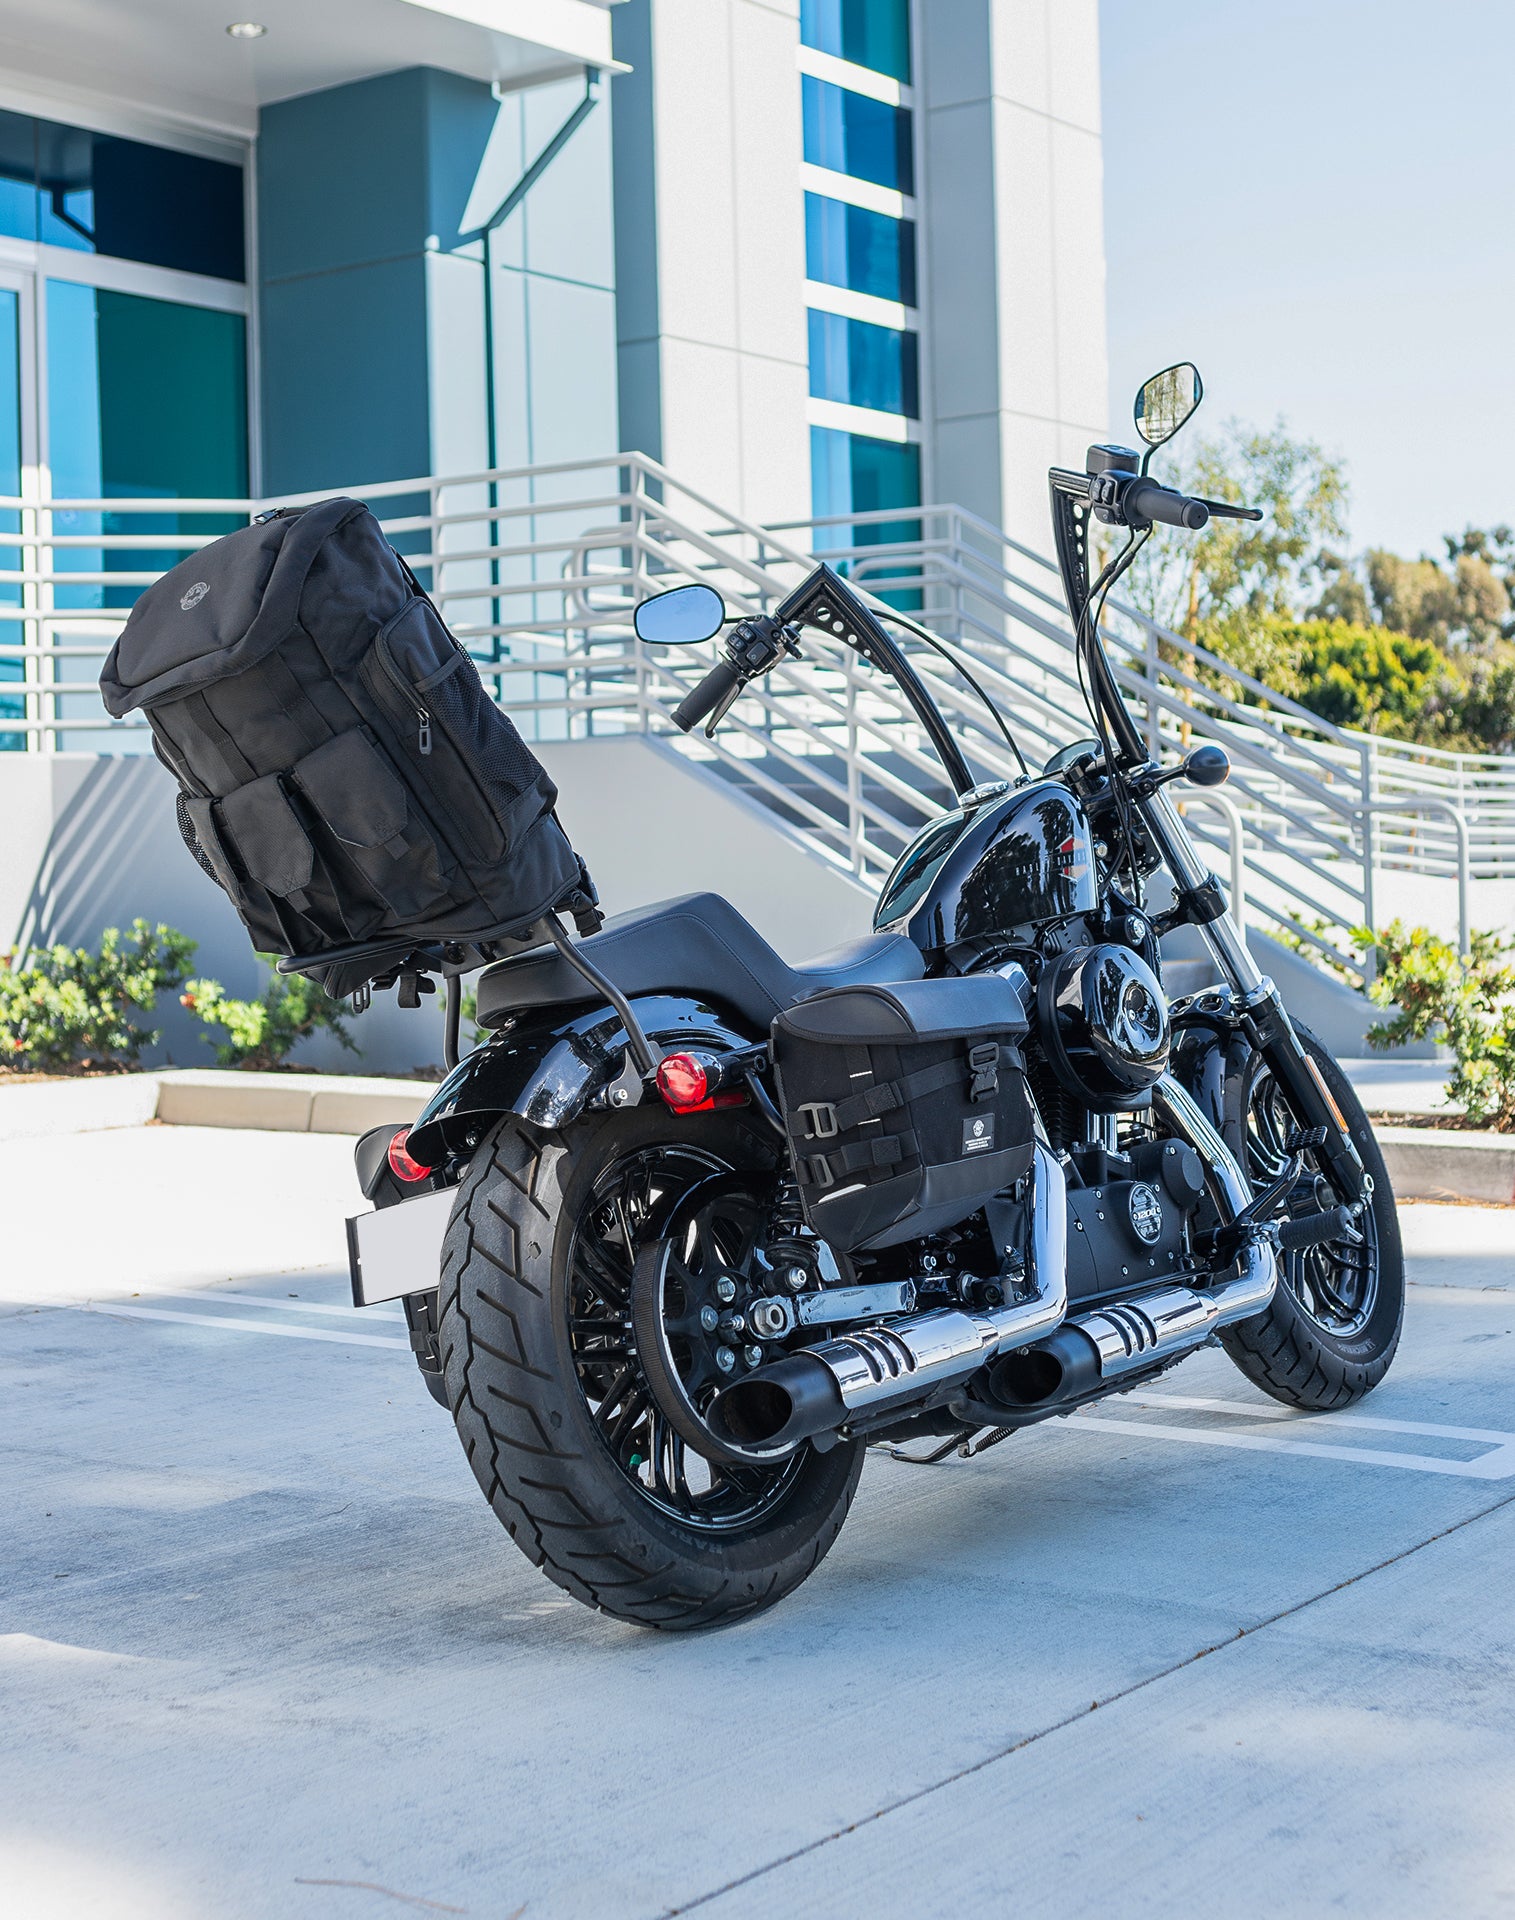 32L - Trident Large Victory Motorcycle Tail Bag